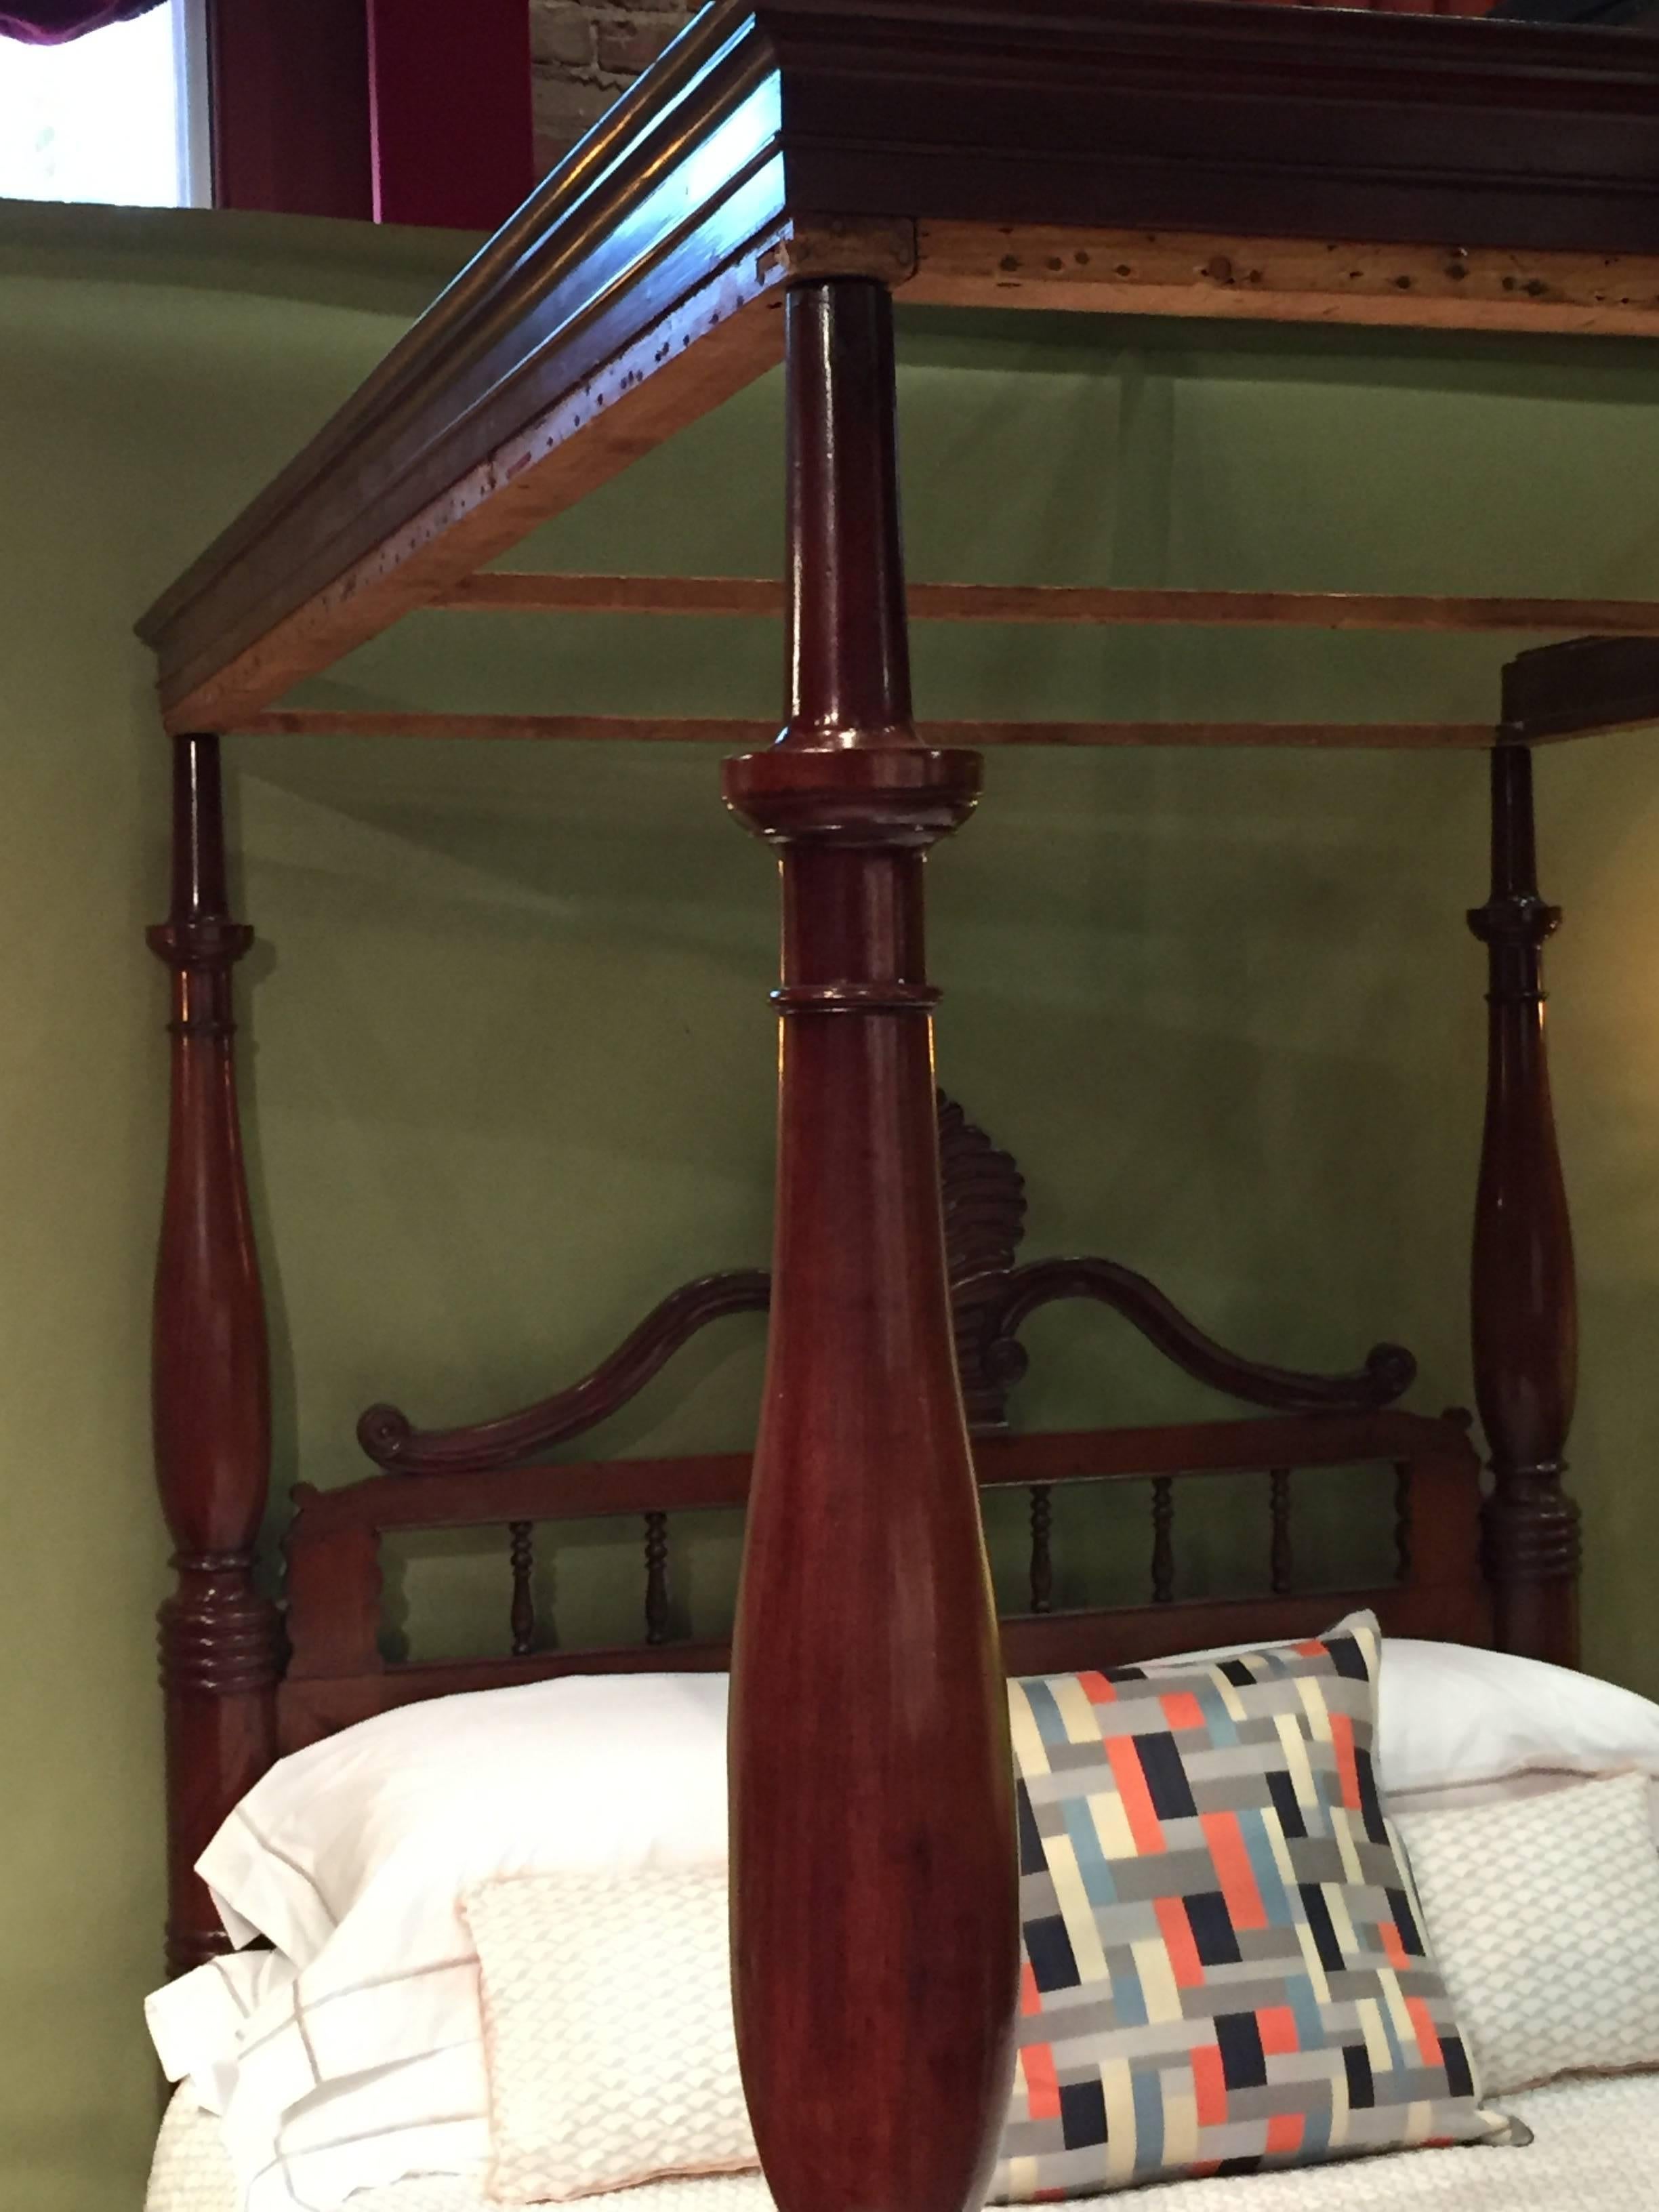 19th century West Indian mahogany four post bed. Pineapple accent as pediment of headboard with nicely turned posts and original foot rail.